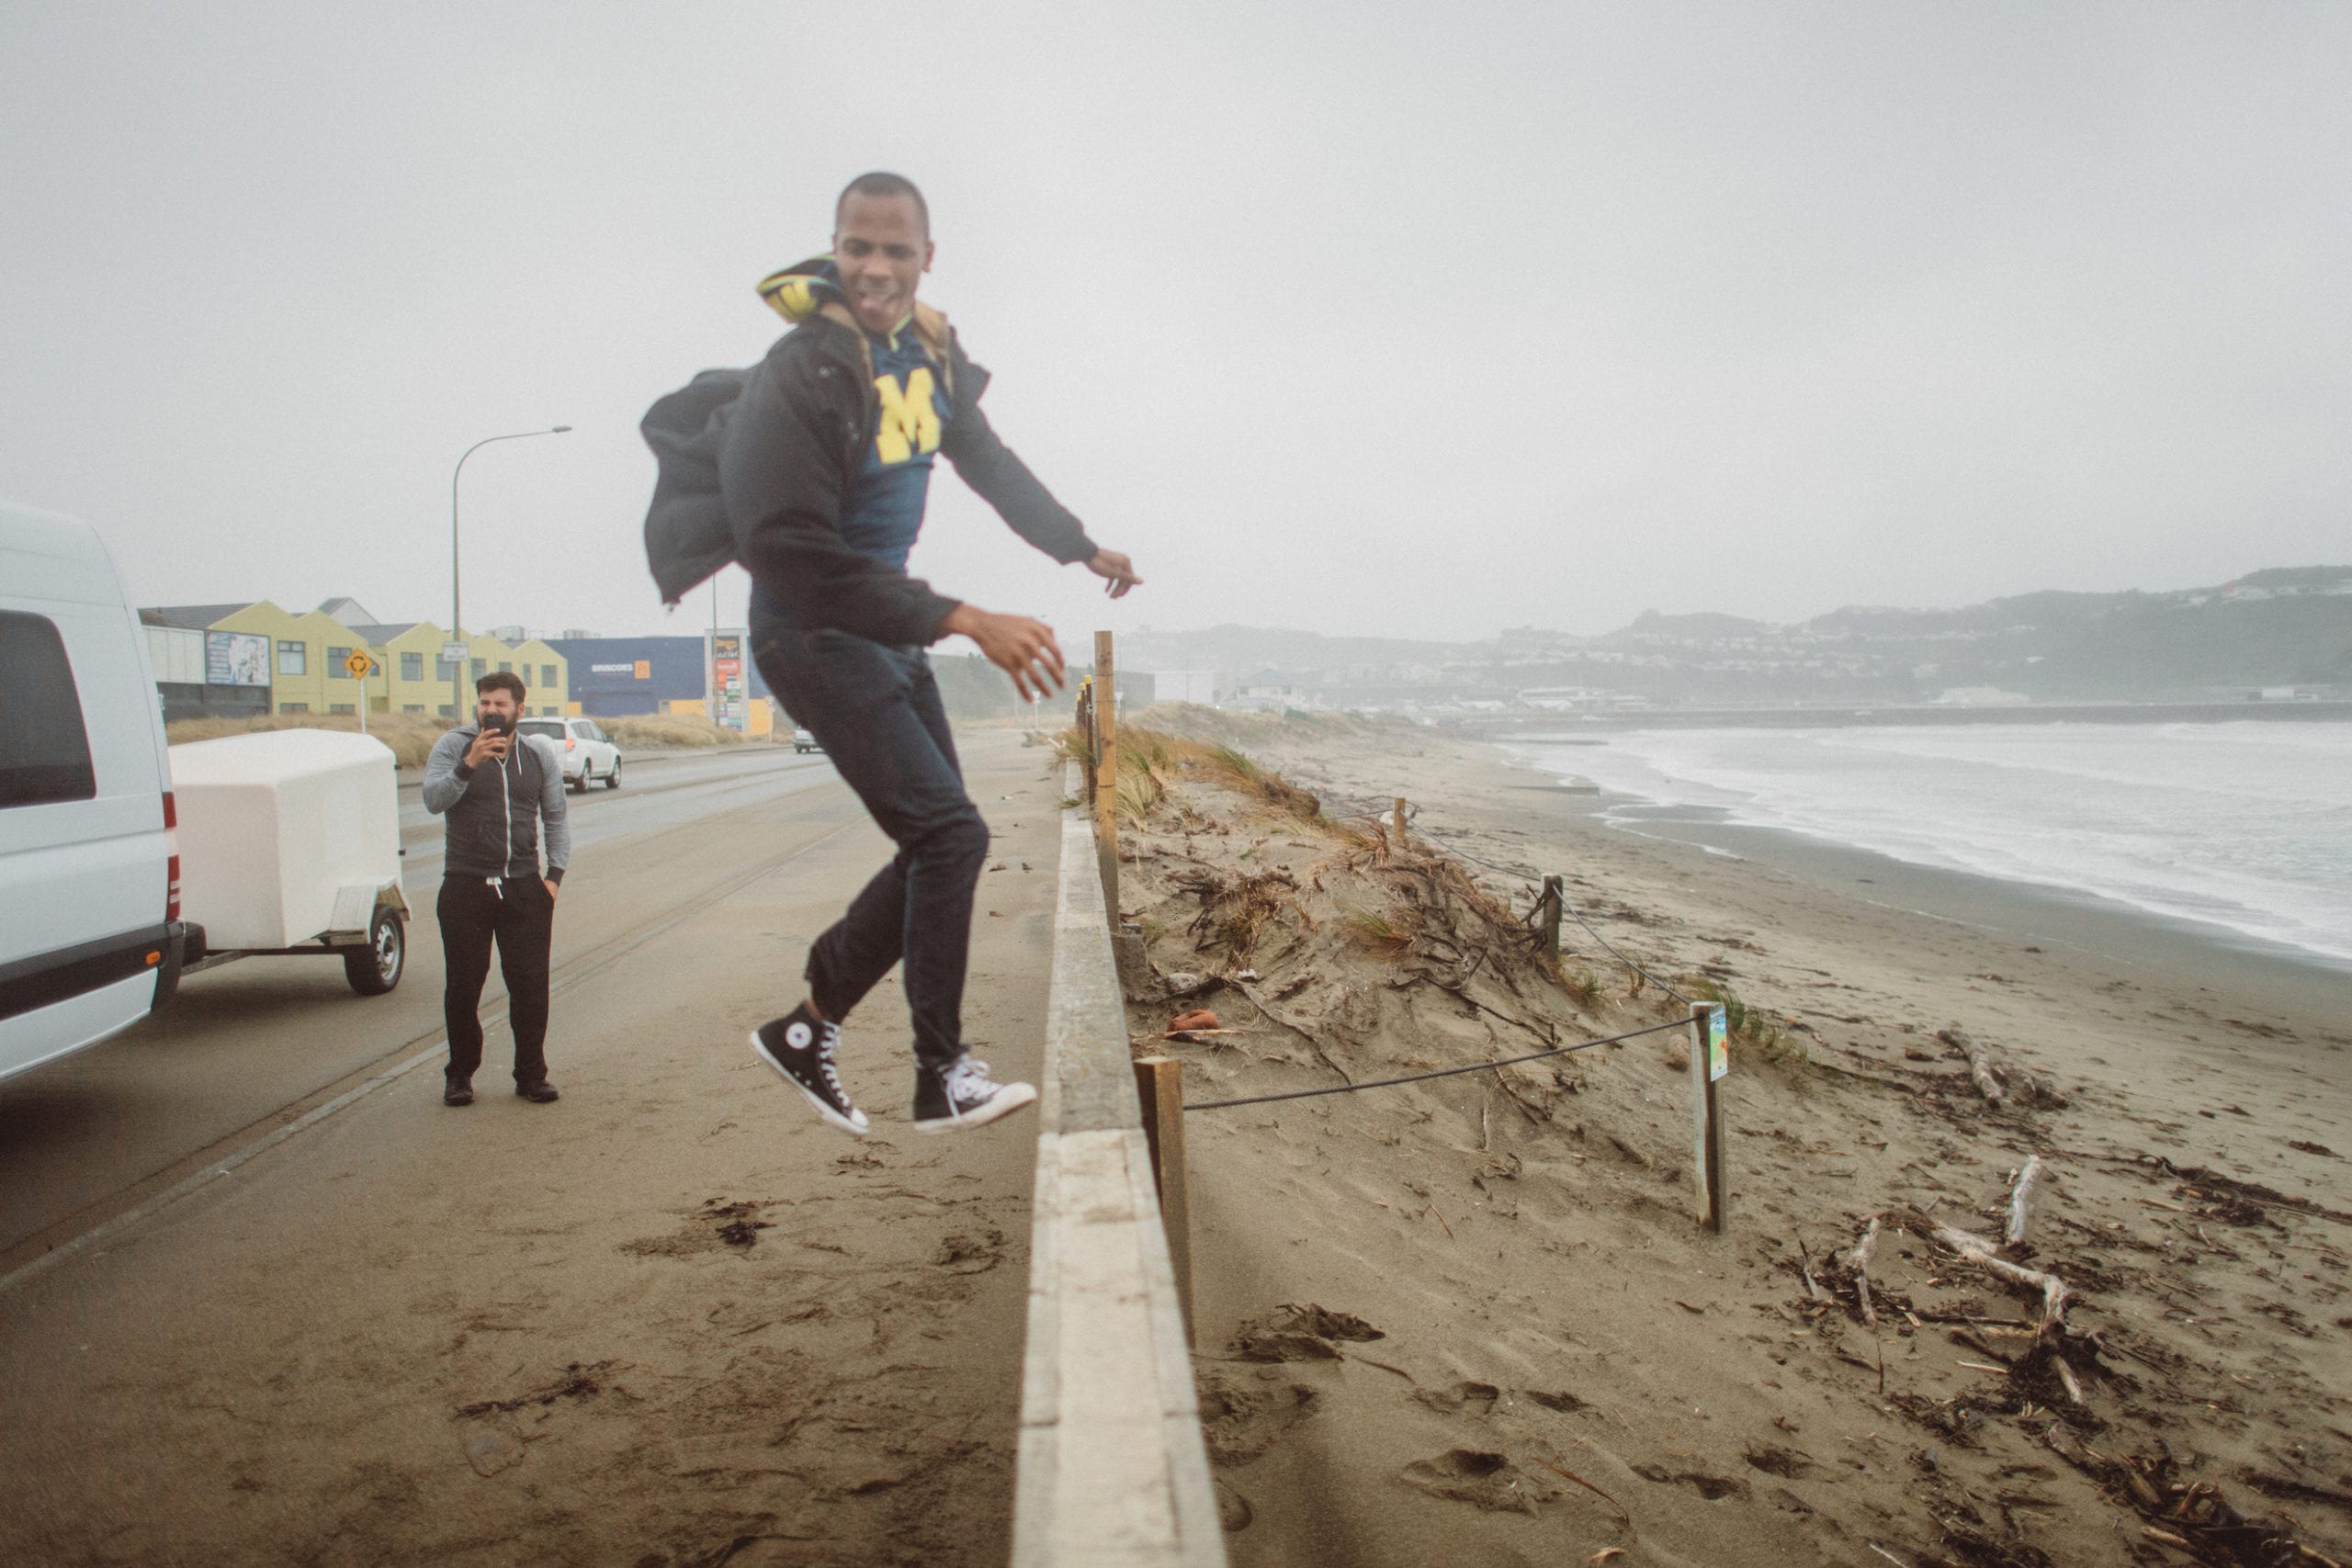 JSM African American man wearing a Michigan sweater jumping next to a fence by a beach with another man in the background